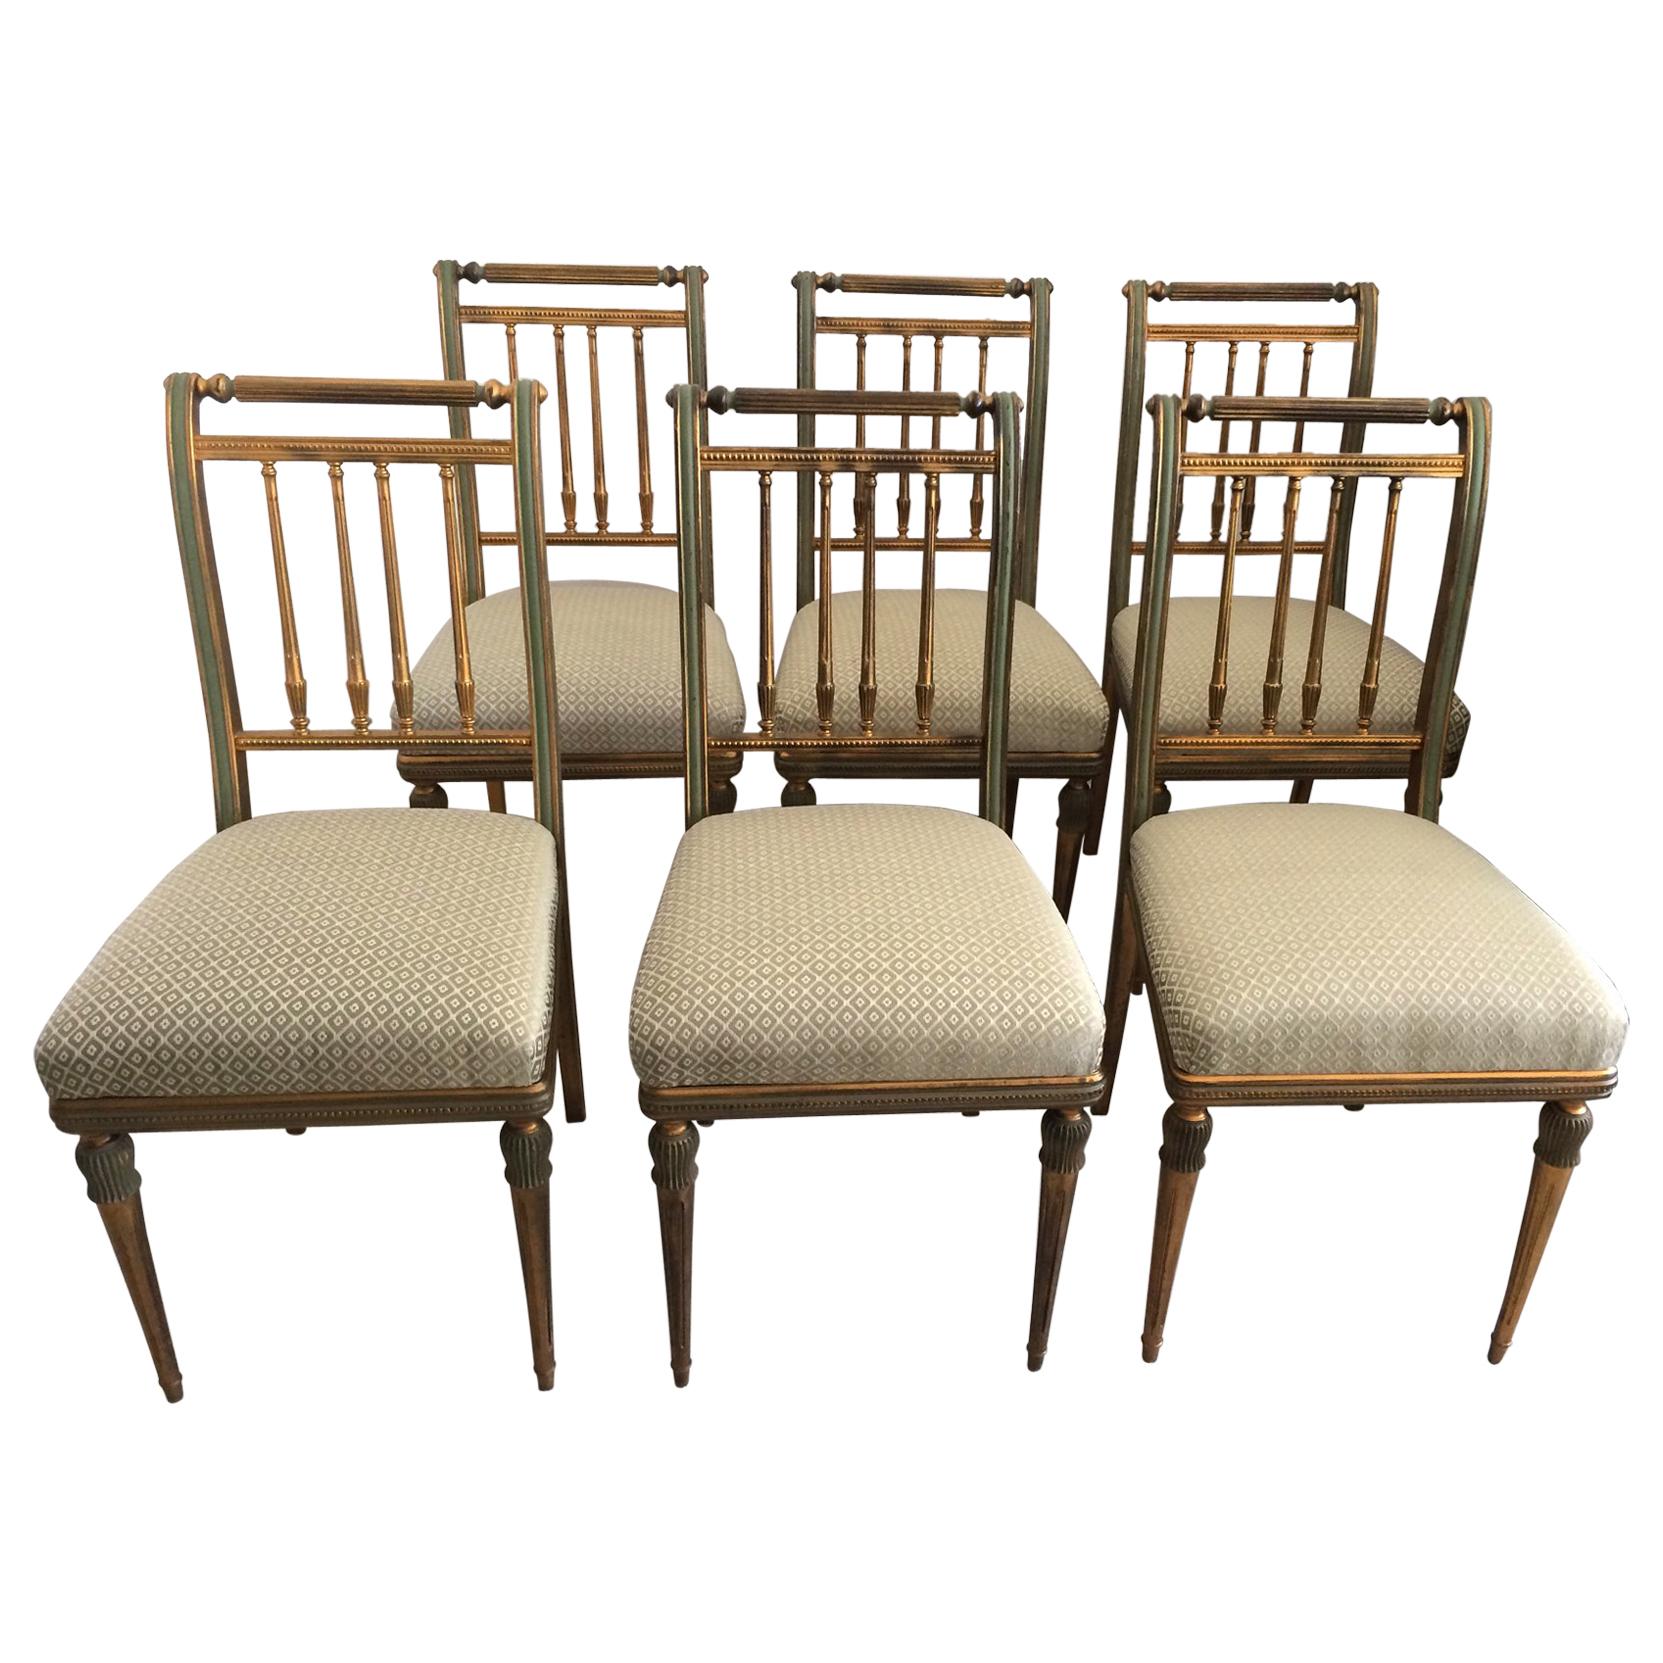 6 Regency Style Dining Room Chairs